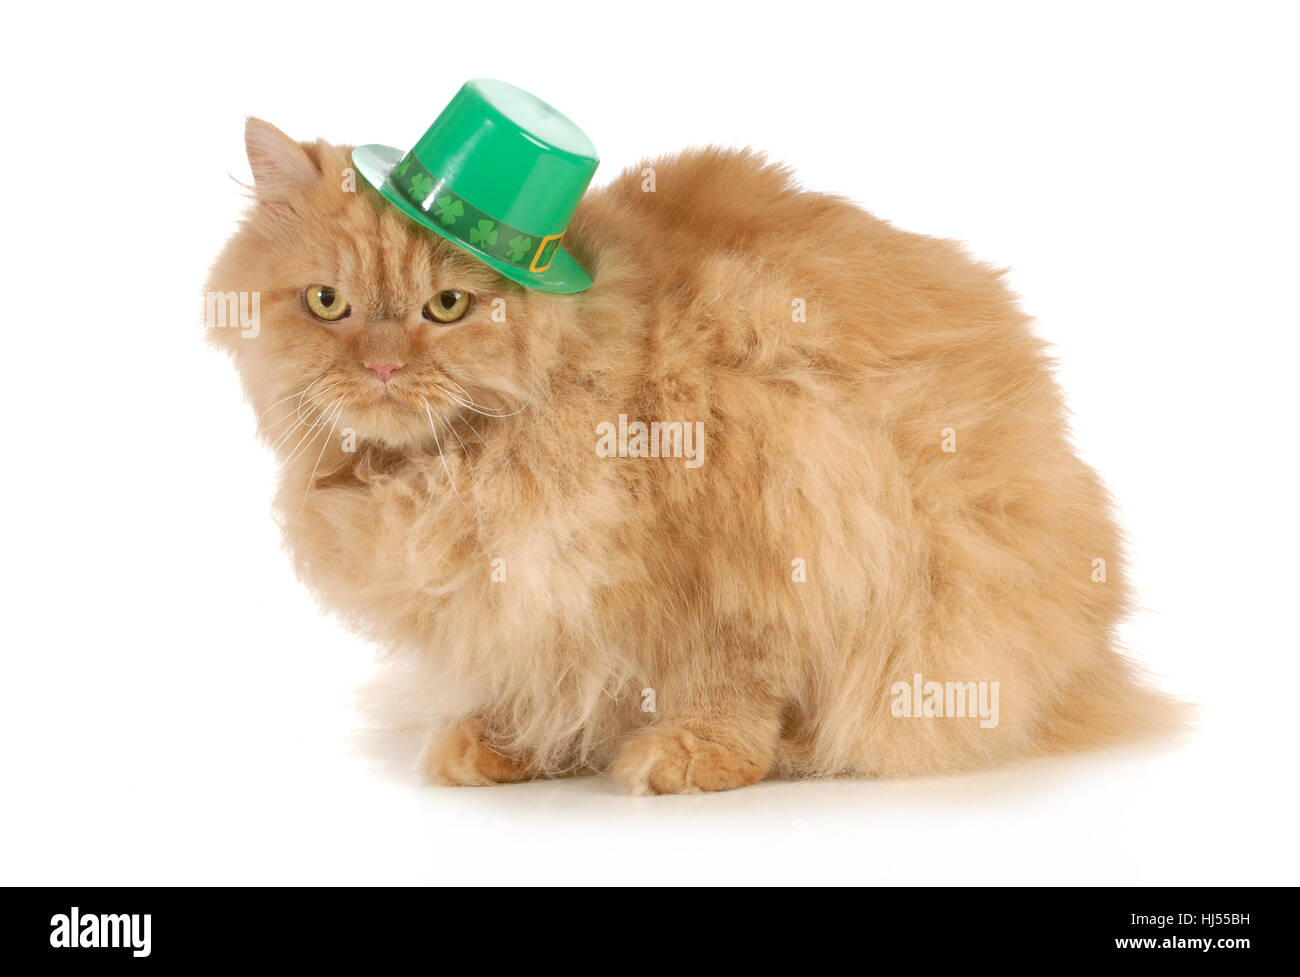 leaf, isolated, animal, pet, green, face, hat, eyes, four, small, tiny, little, Stock Photo